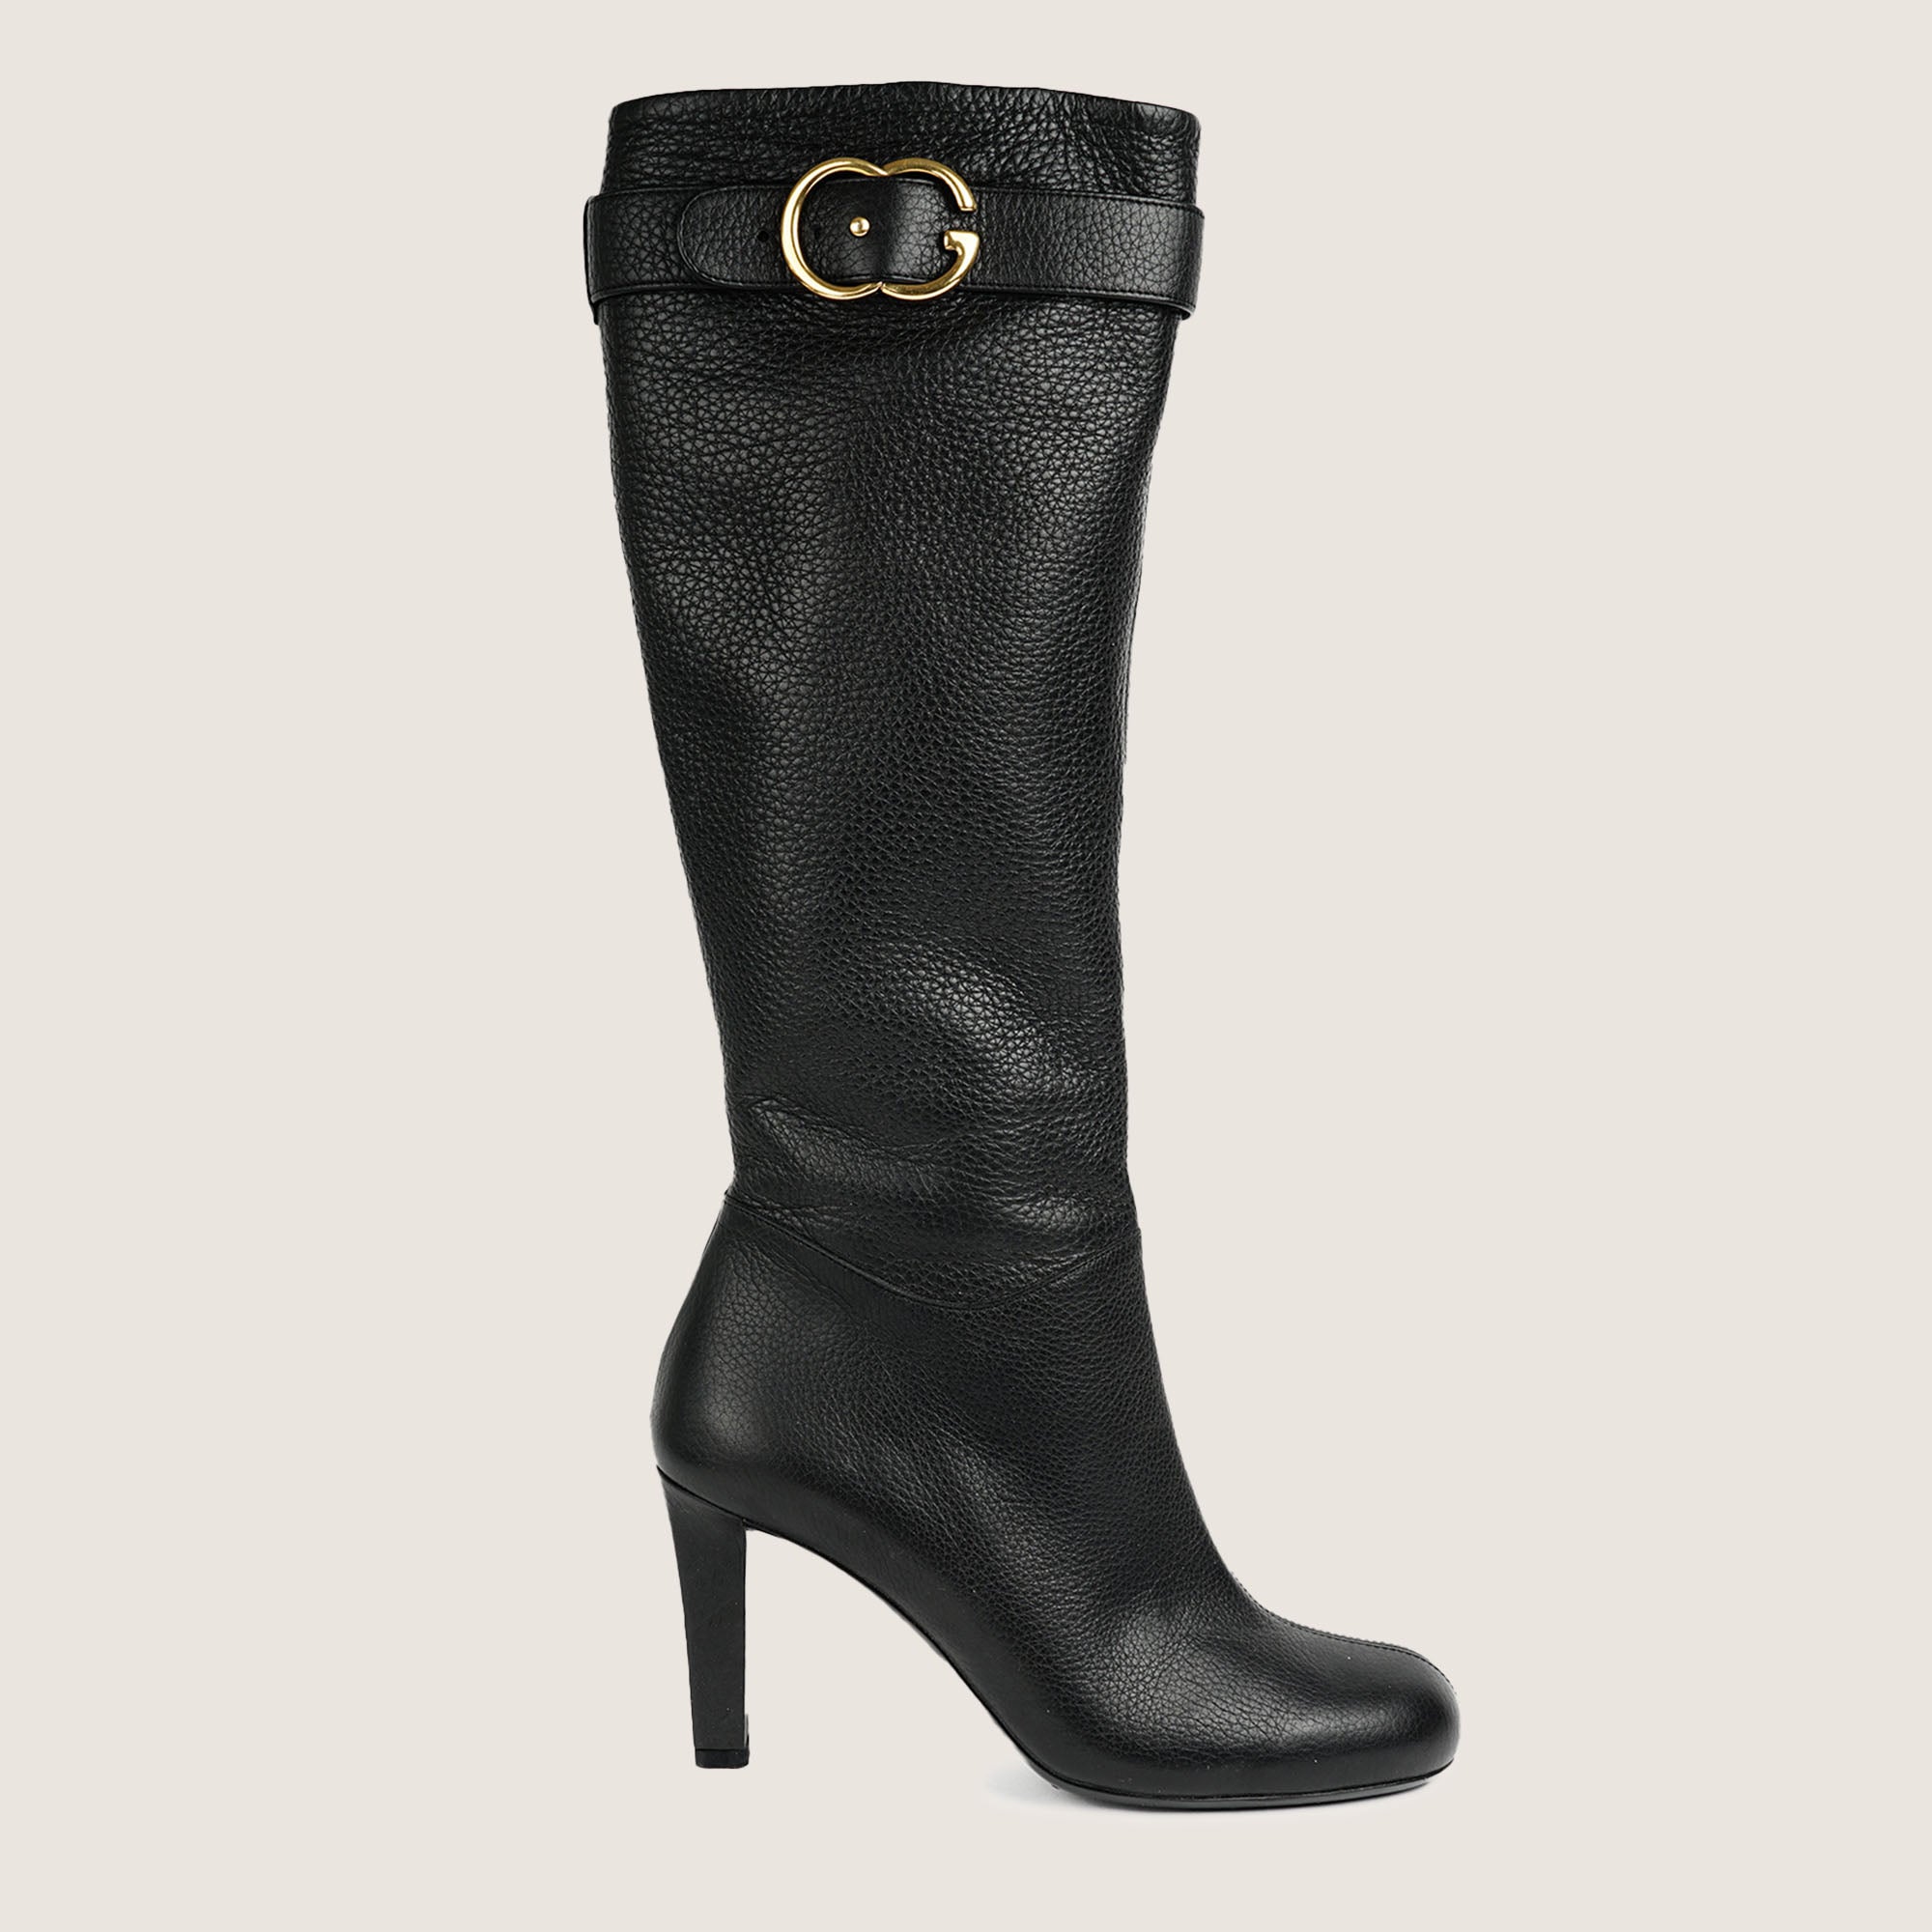 GG High Boots - GUCCI - Affordable Luxury